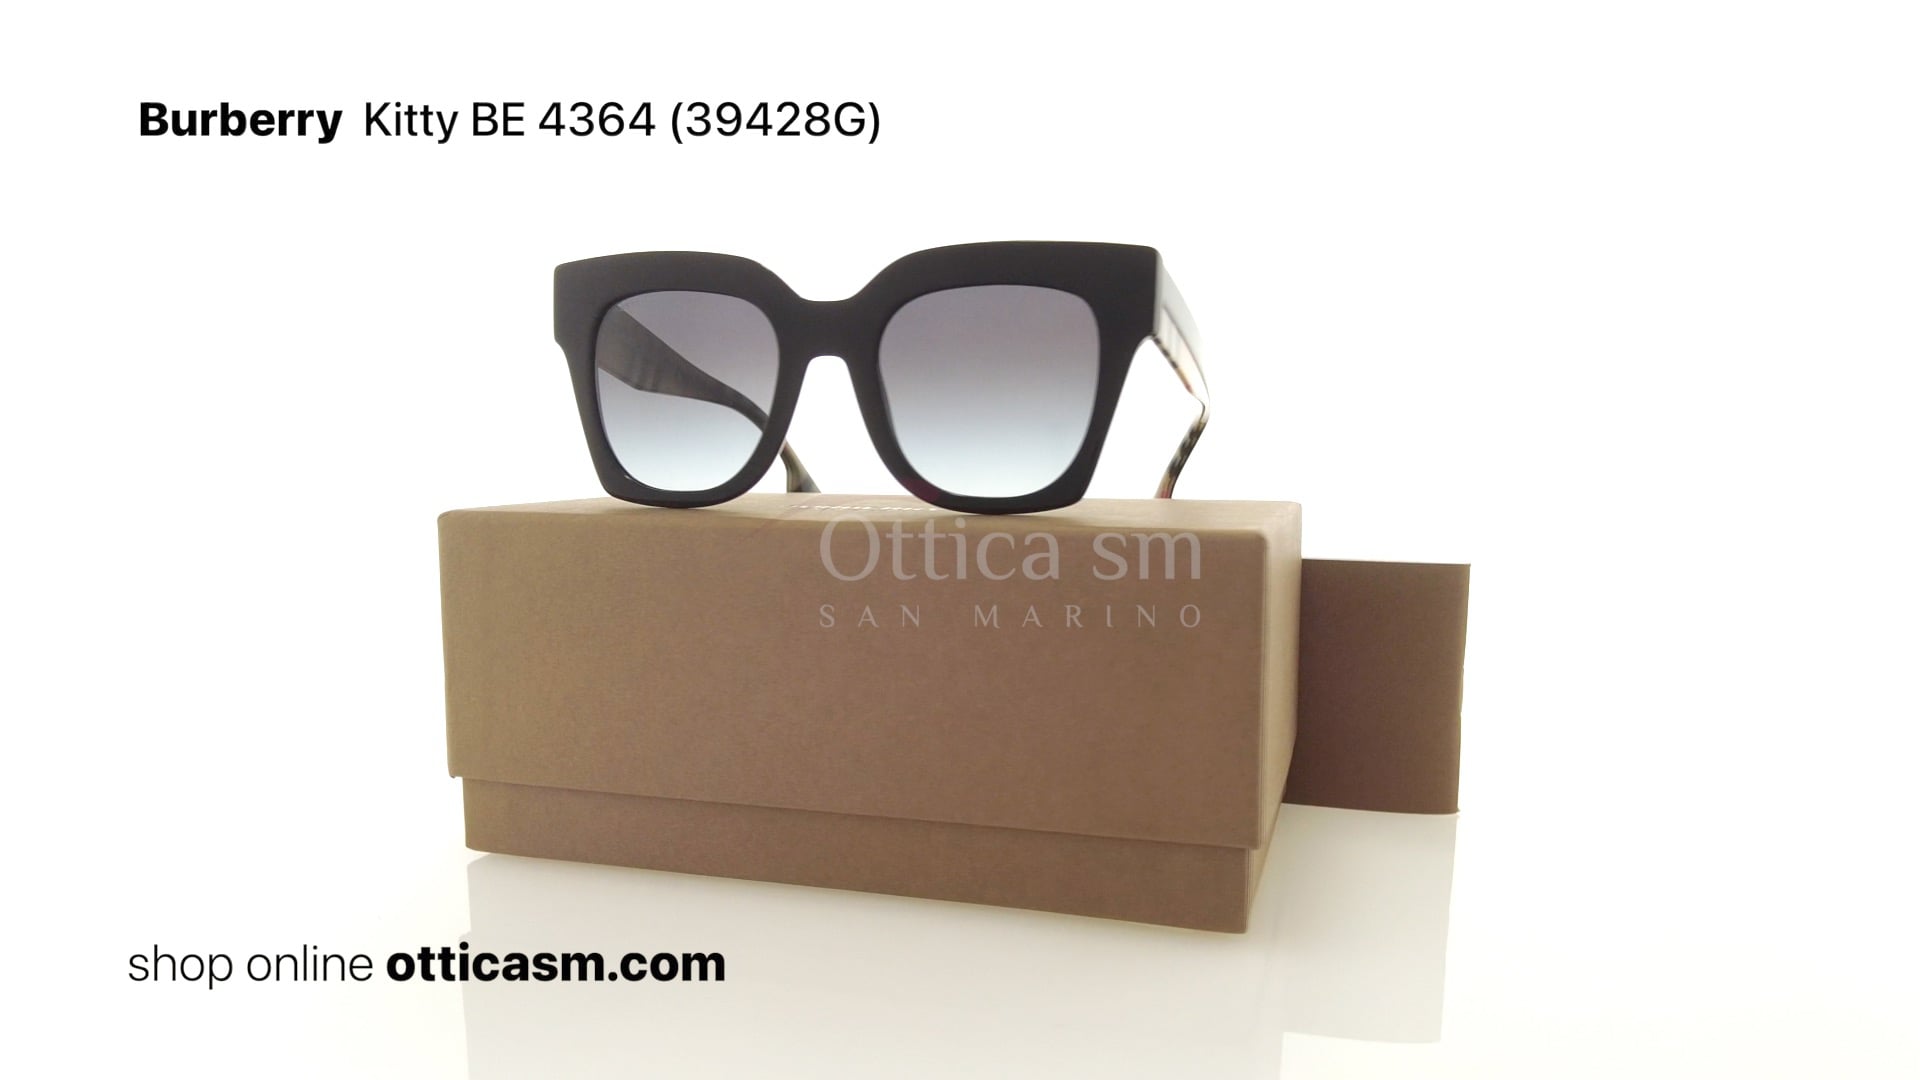 Burberry Kitty BE 4364 (39428G)